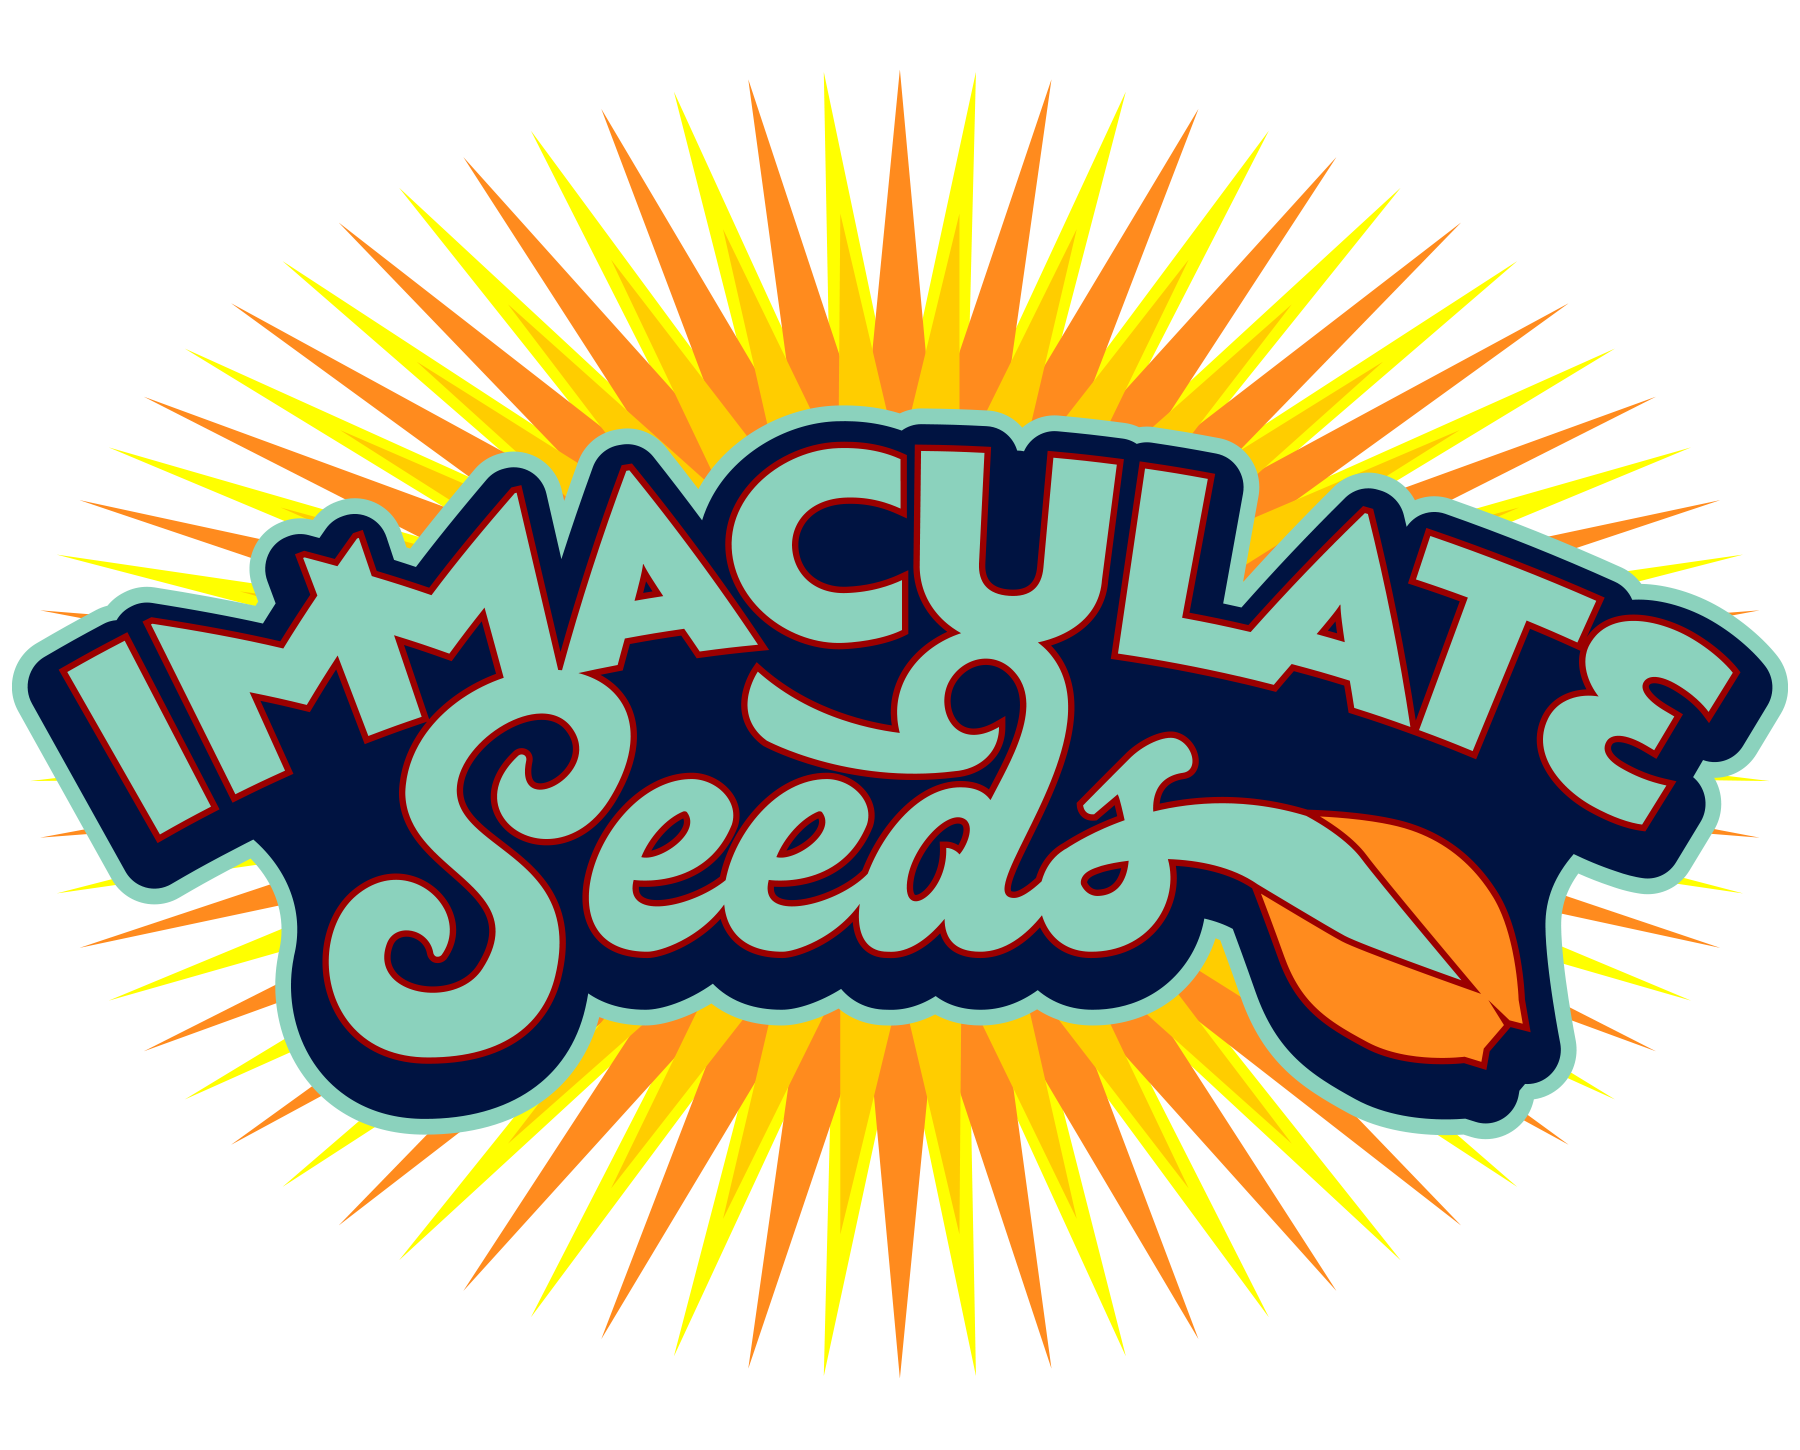 ImmaculateSeeds_RGB_1800x1450.png